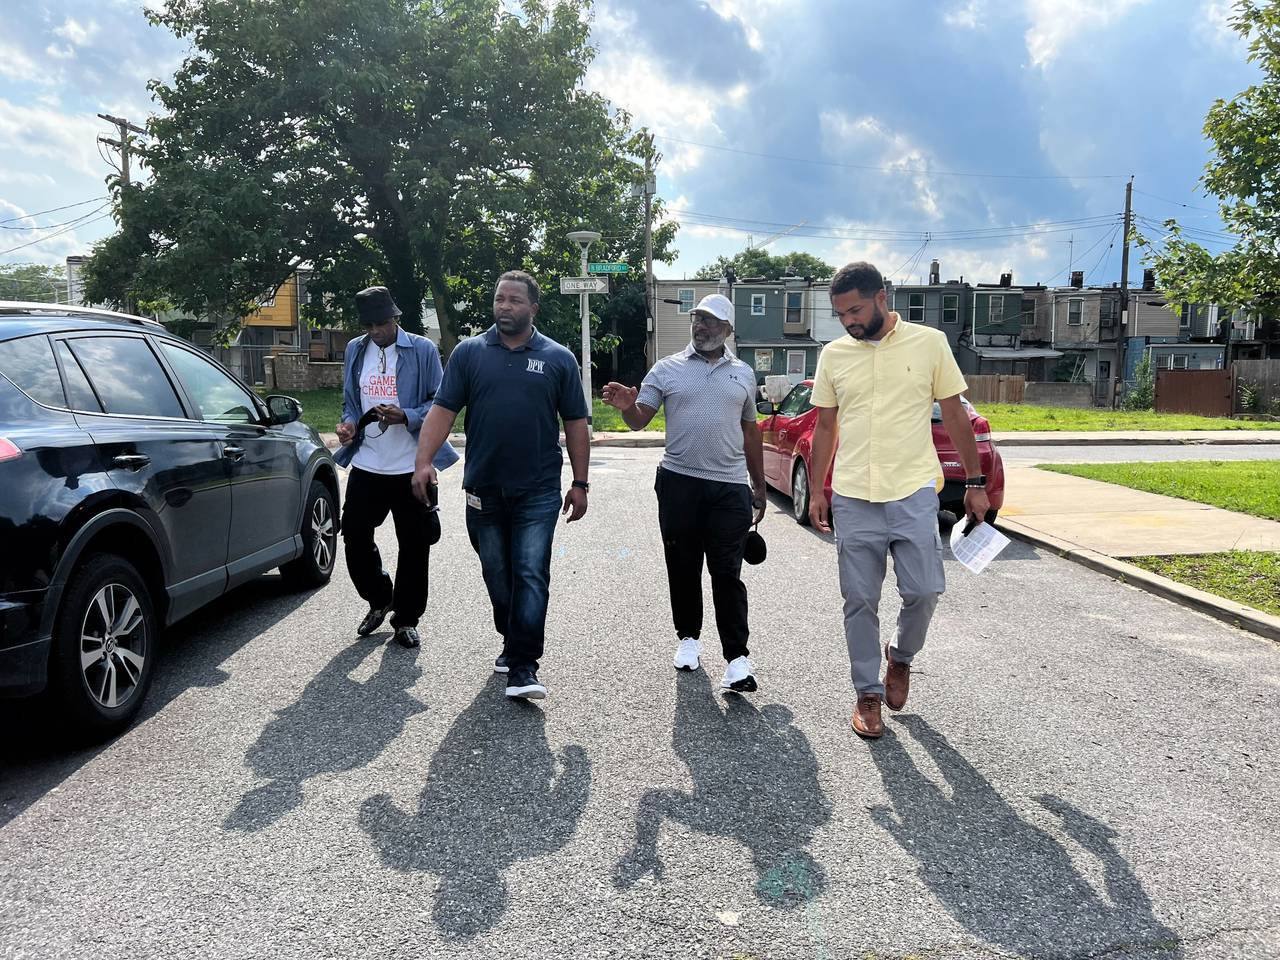 From right to left, Rick Leandry of the Mayor's Office of Neighborhood Engagement and Safety, neighborhood leader Terry "Uncle T" Williams, and Terrance Brown of the Department of Public Works walk the area of North Milton and Milliman Streets, searching for quality of life issues for city workers to address.